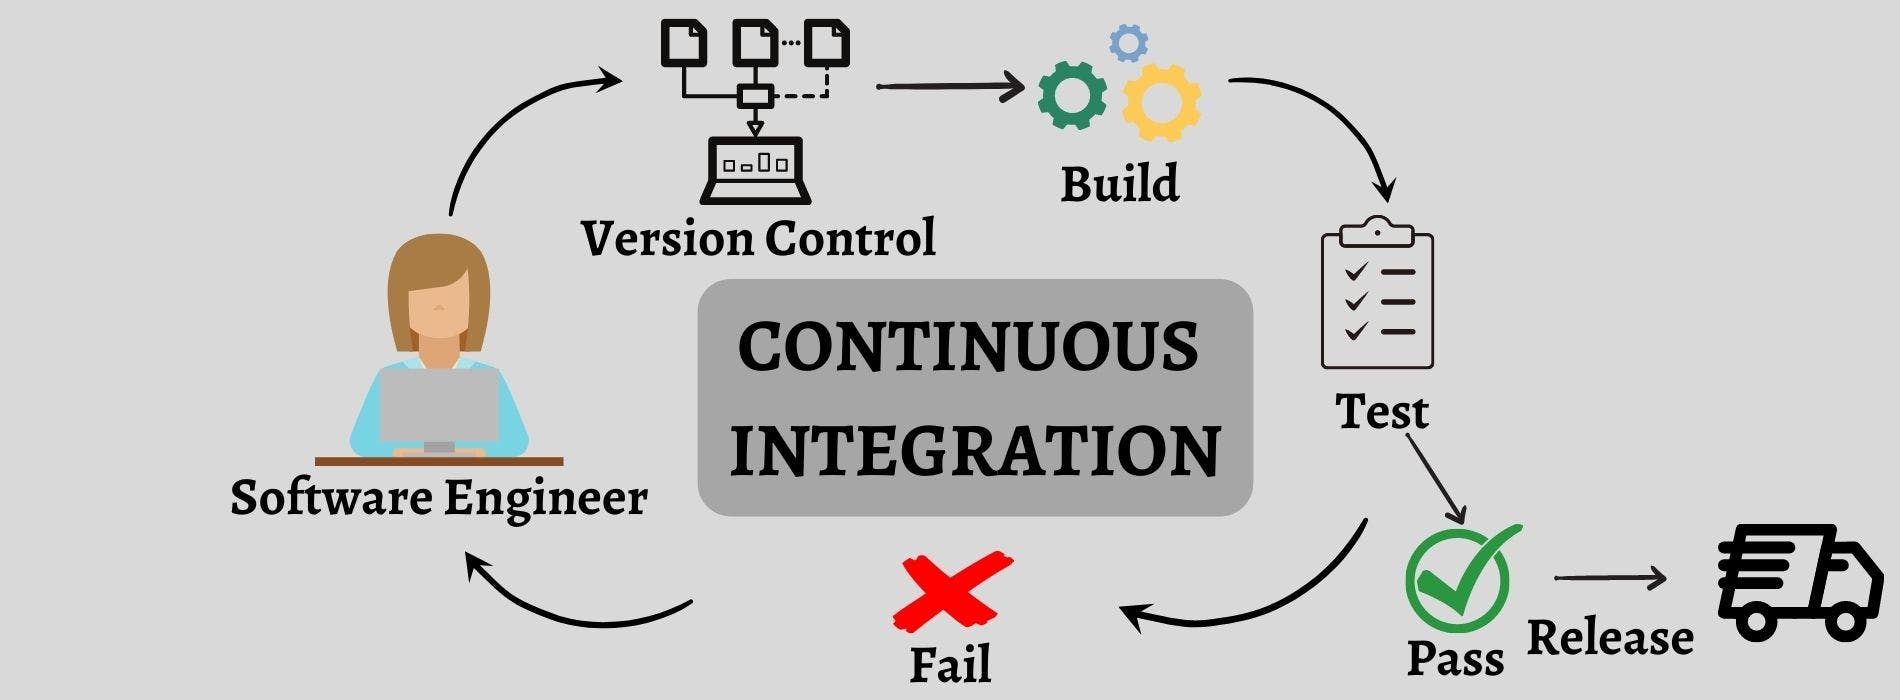 Continuous Integration.jpg